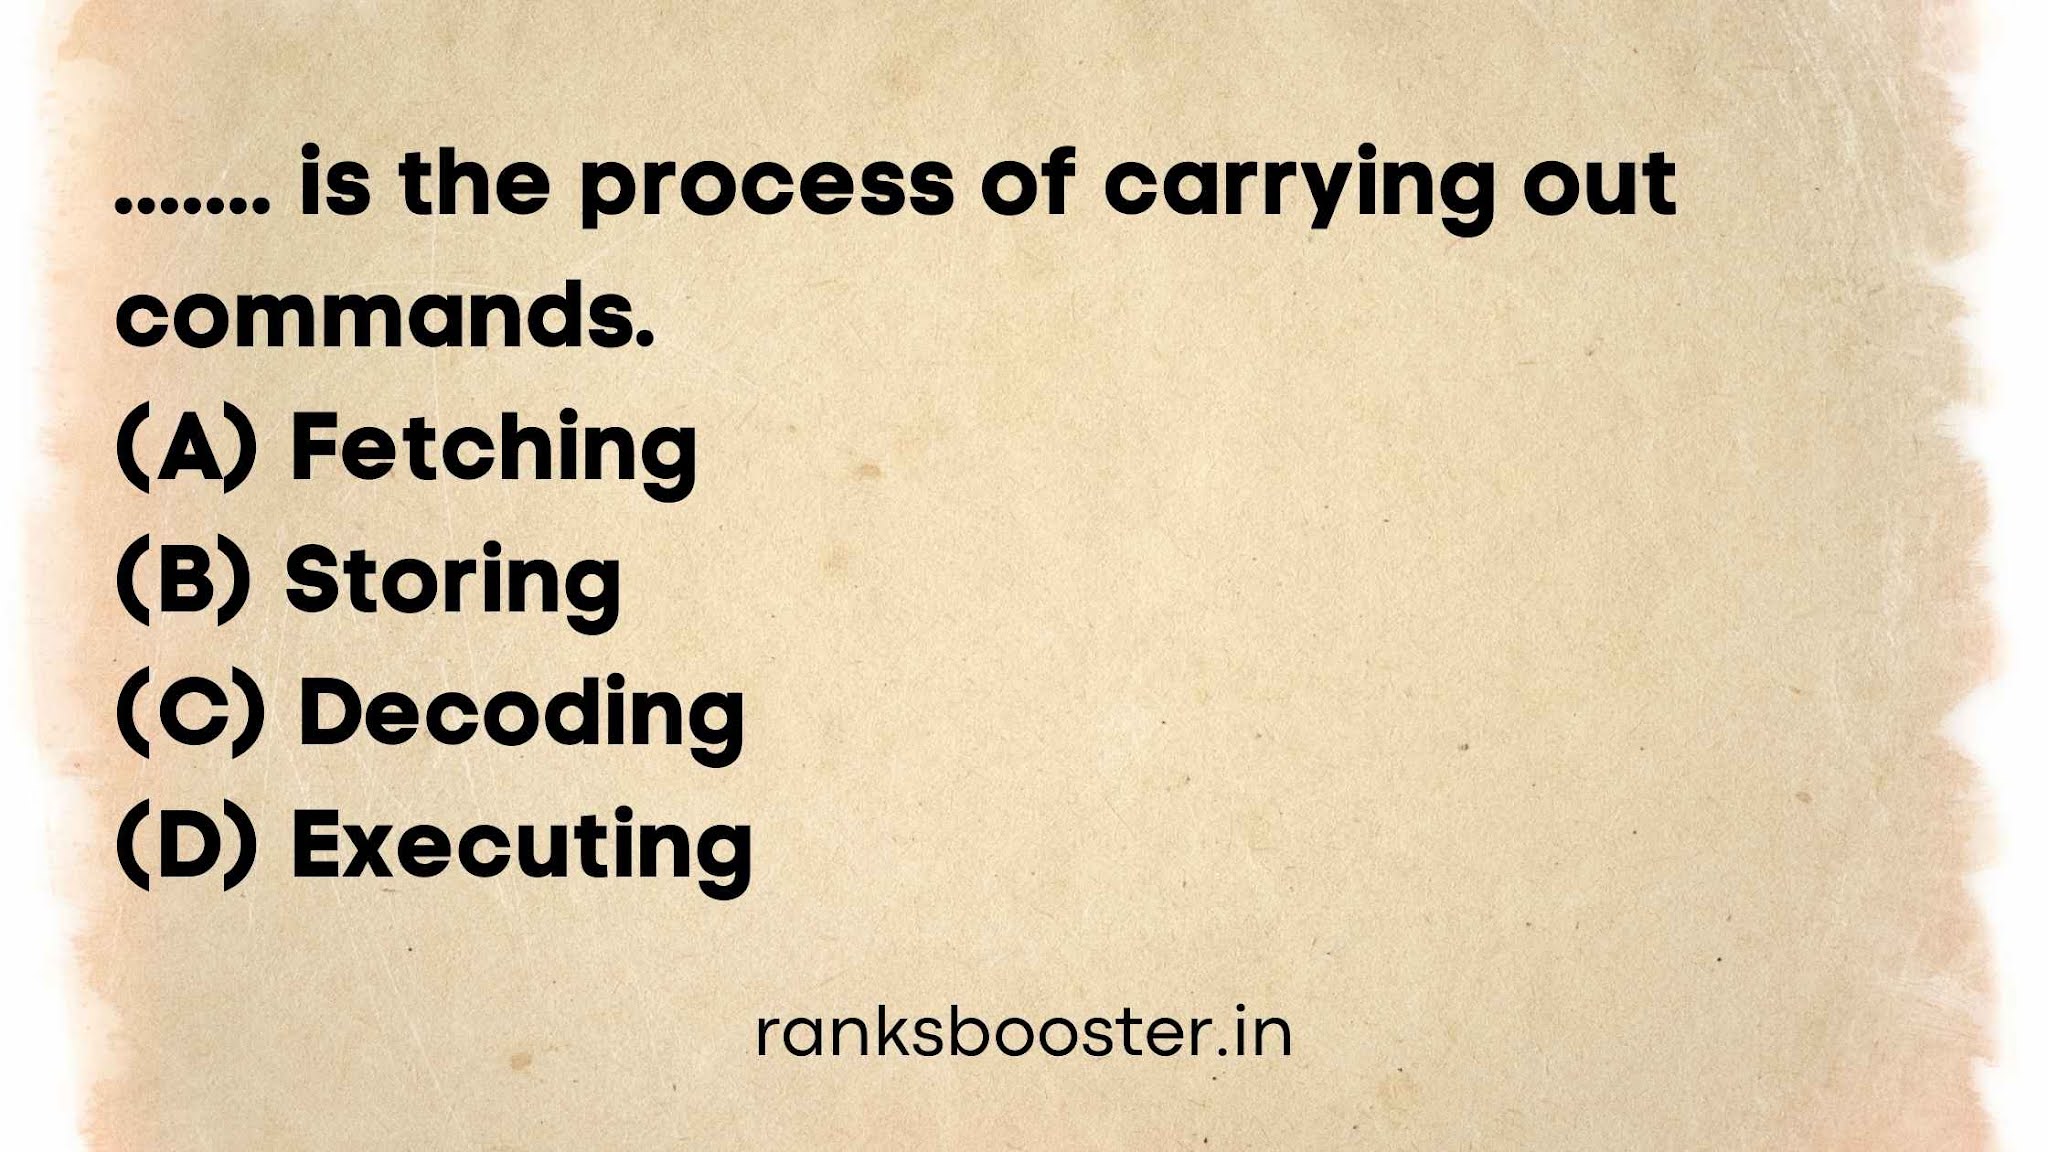 is the process of carrying out commands (A) Fetching (B) Storing (C) Decoding (D) Executing